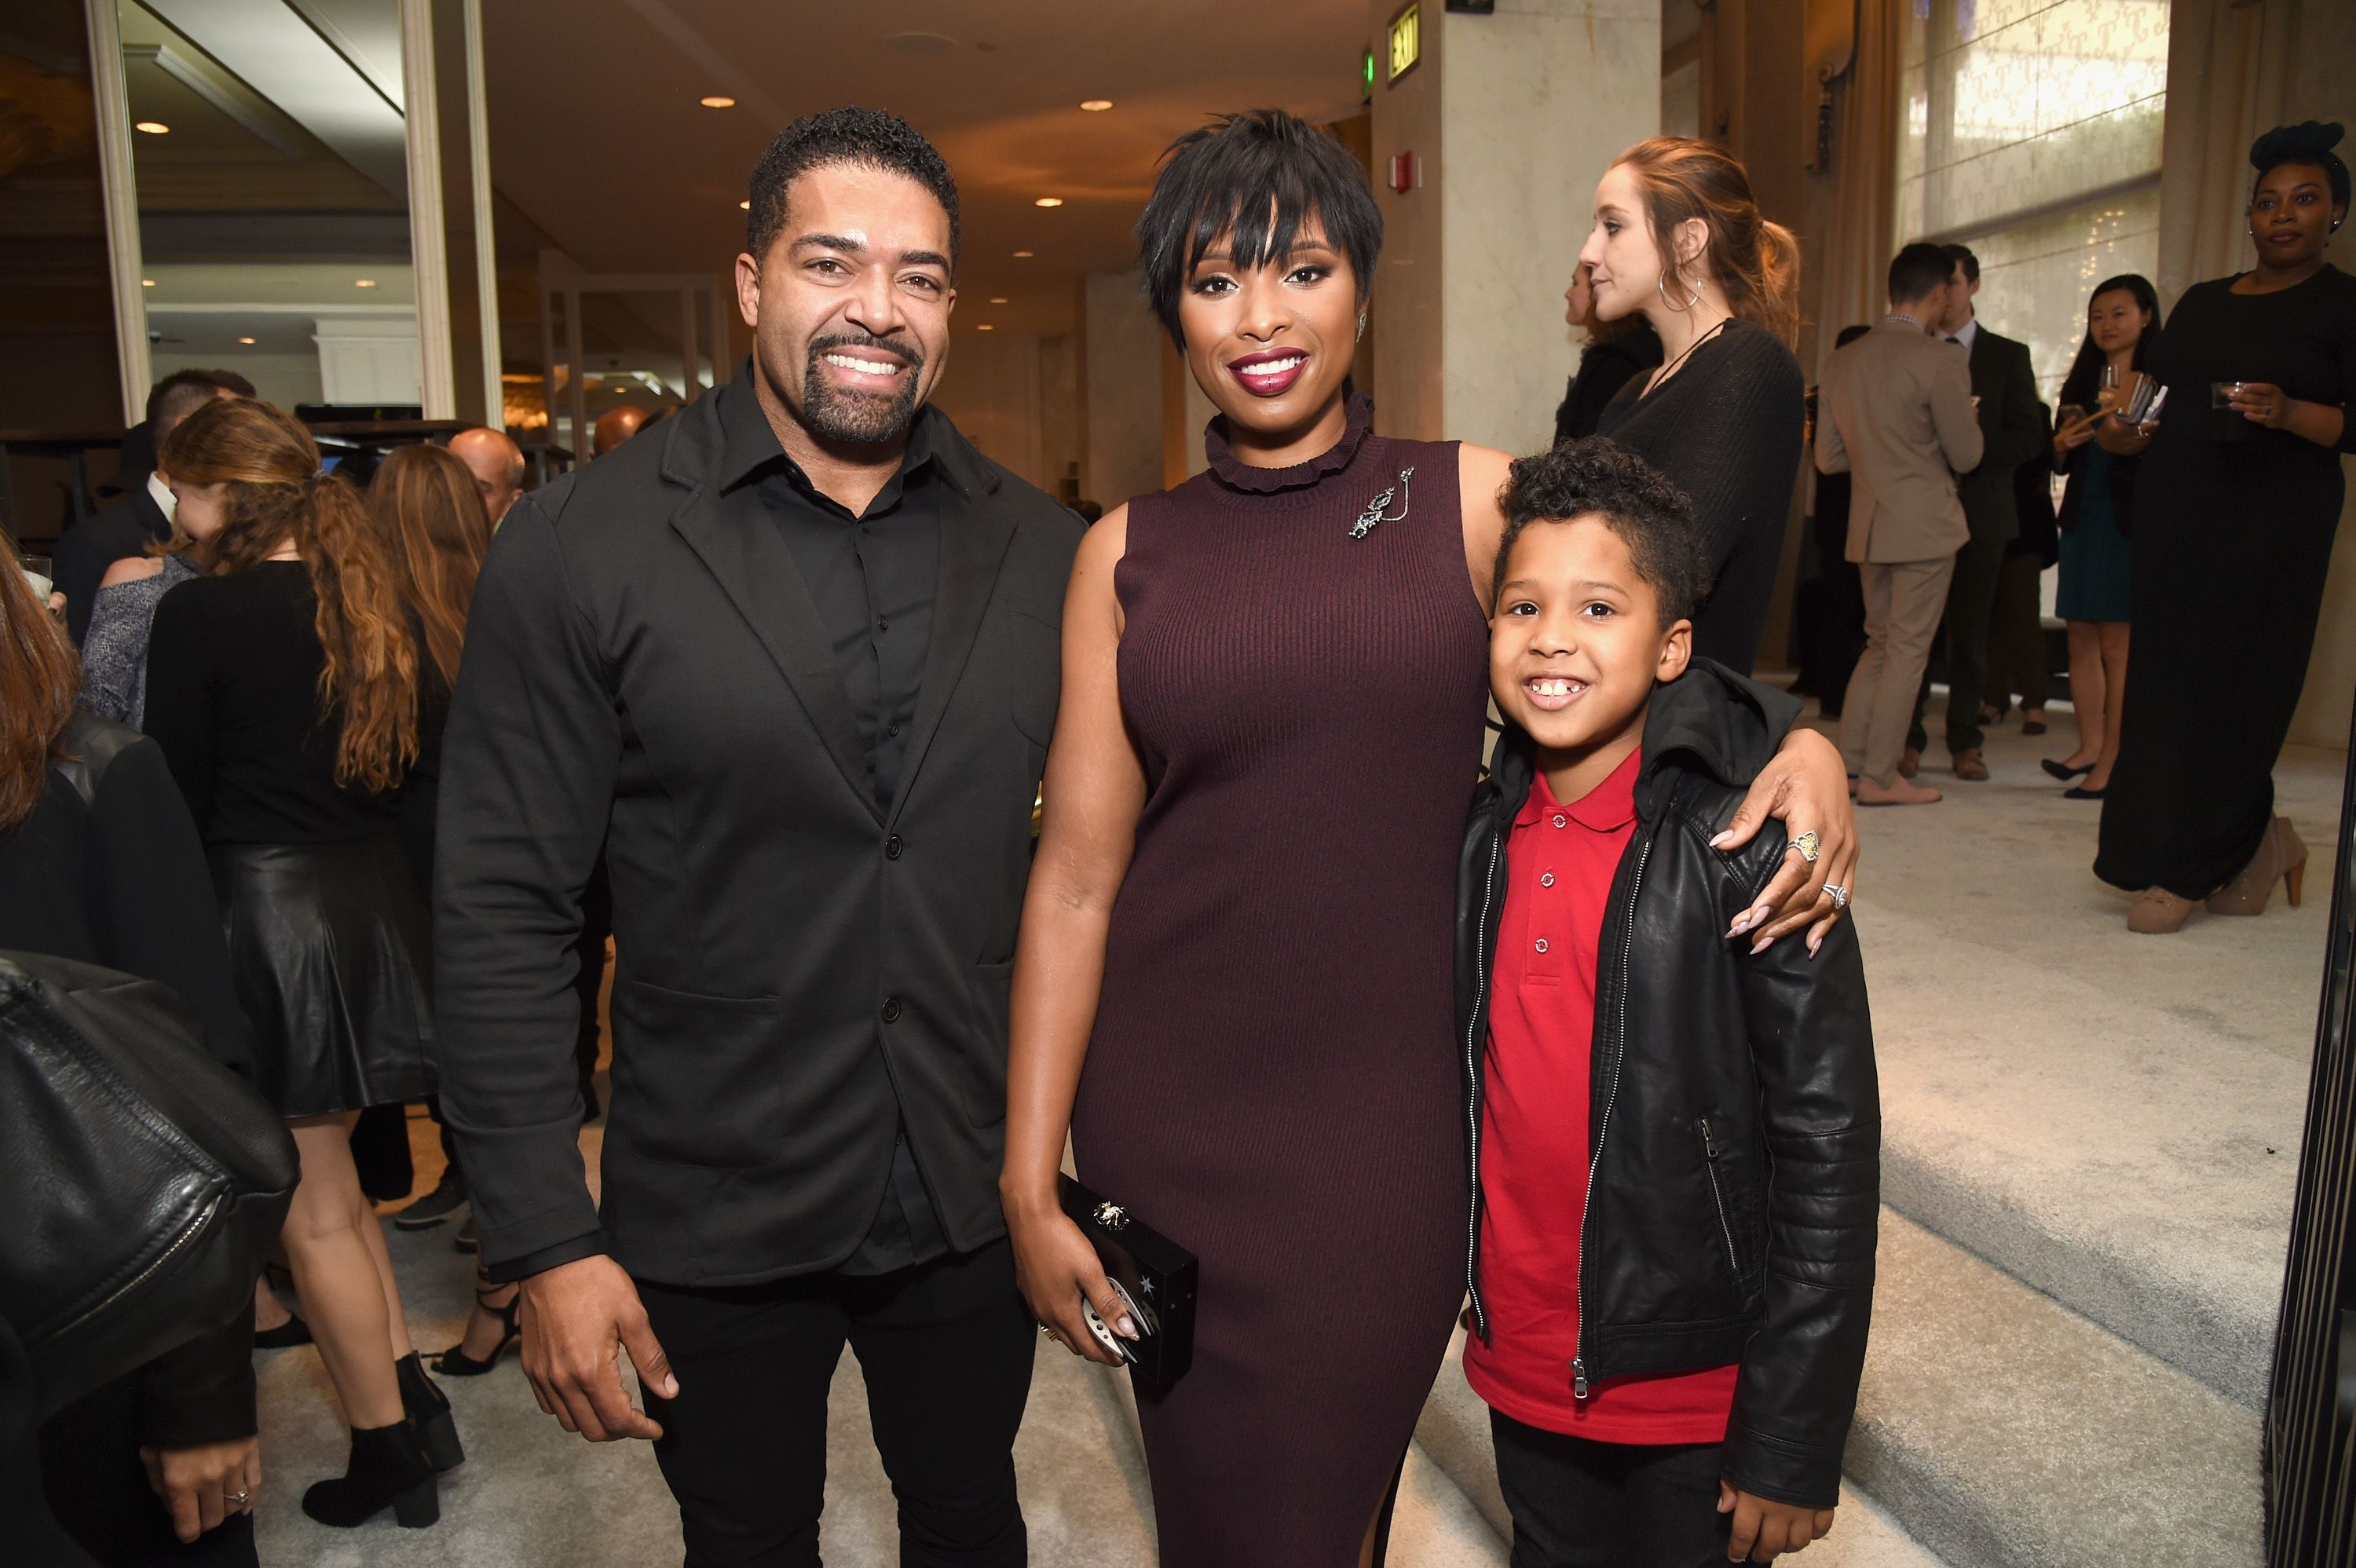 Wrestler David Otunga, honoree Jennifer Hudson, and their son David Otunga Jr. at the 2016 March of Dimes Celebration of Babies at the Beverly Wilshire Four Seasons Hotel on December 9, 2016 | Source: Getty Images